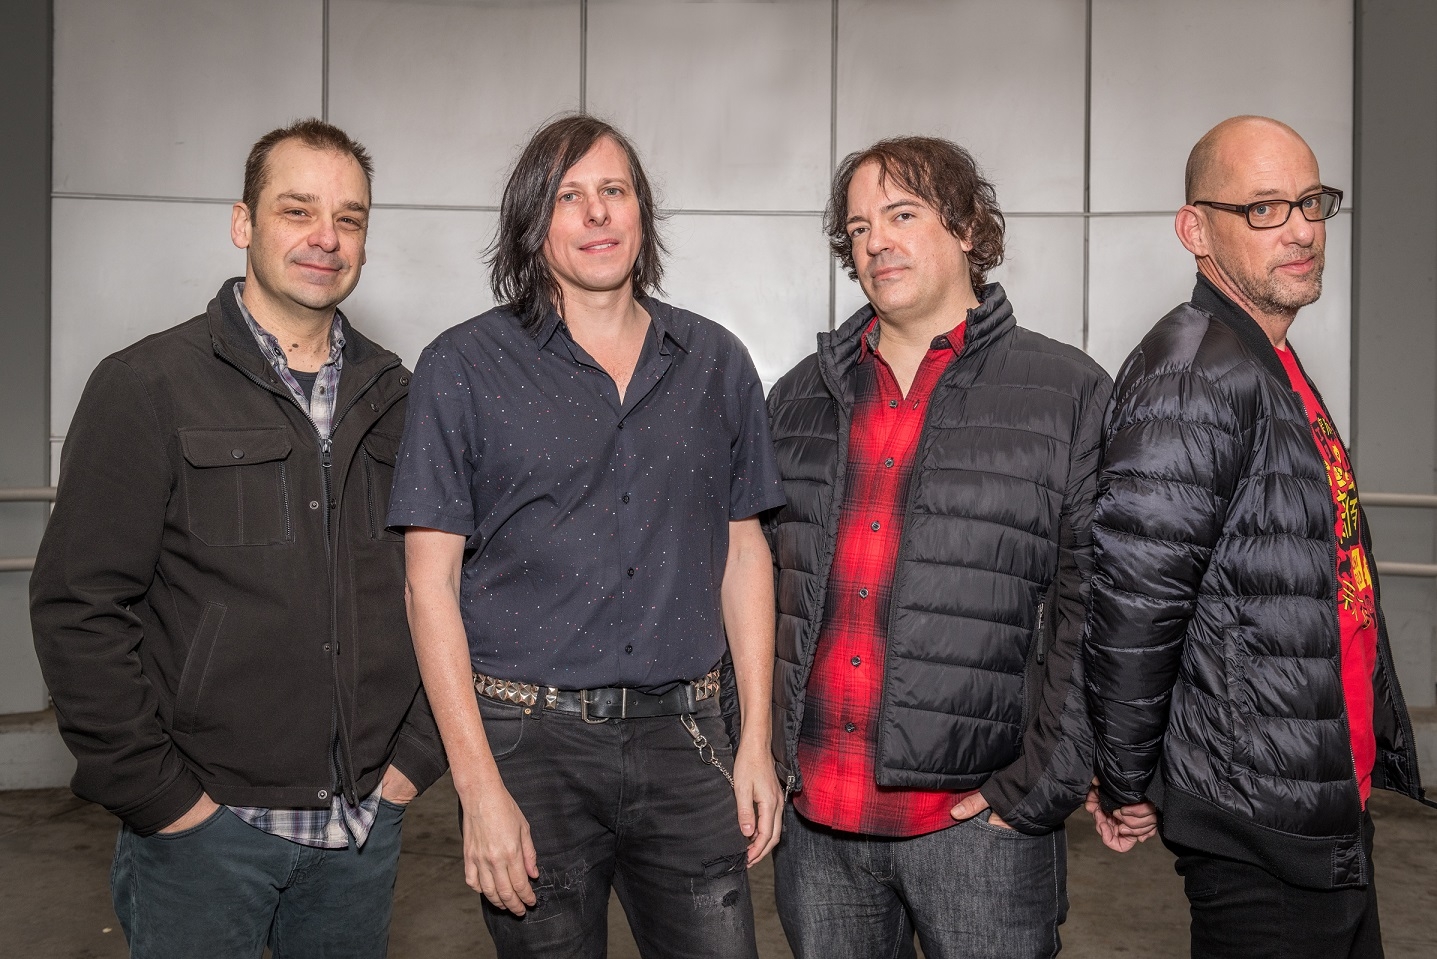 Posies celebrates 30 years at Bell’s: A conversation with Ken Stringfellow